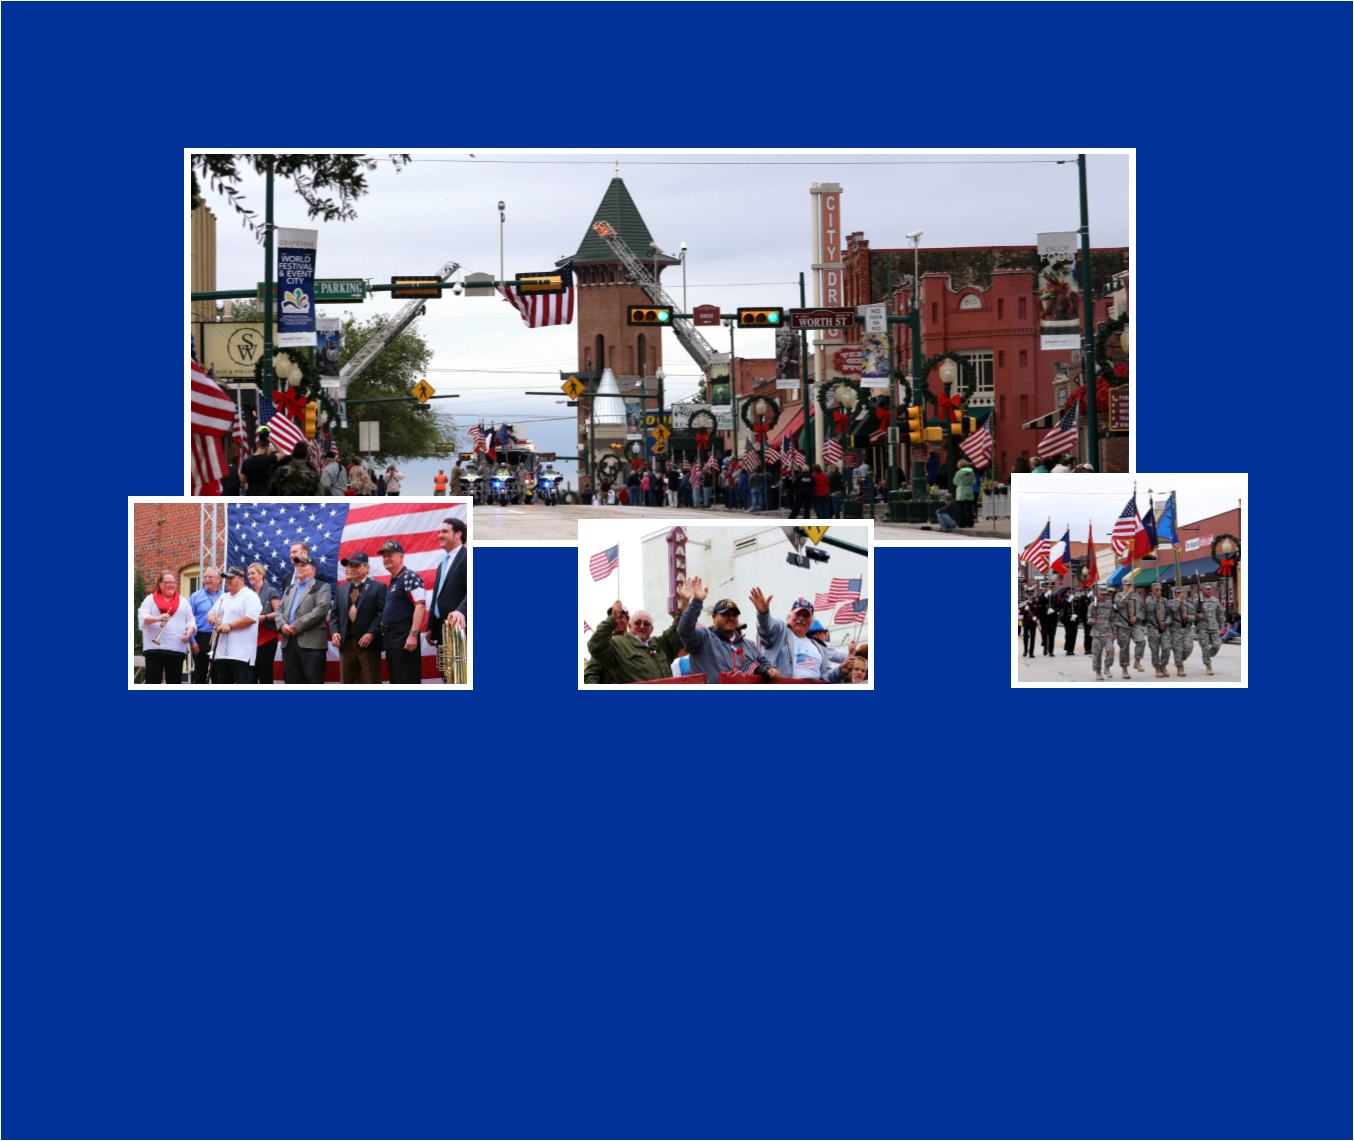 Grapevine Holds Annual Veterans Day Parade & Fair